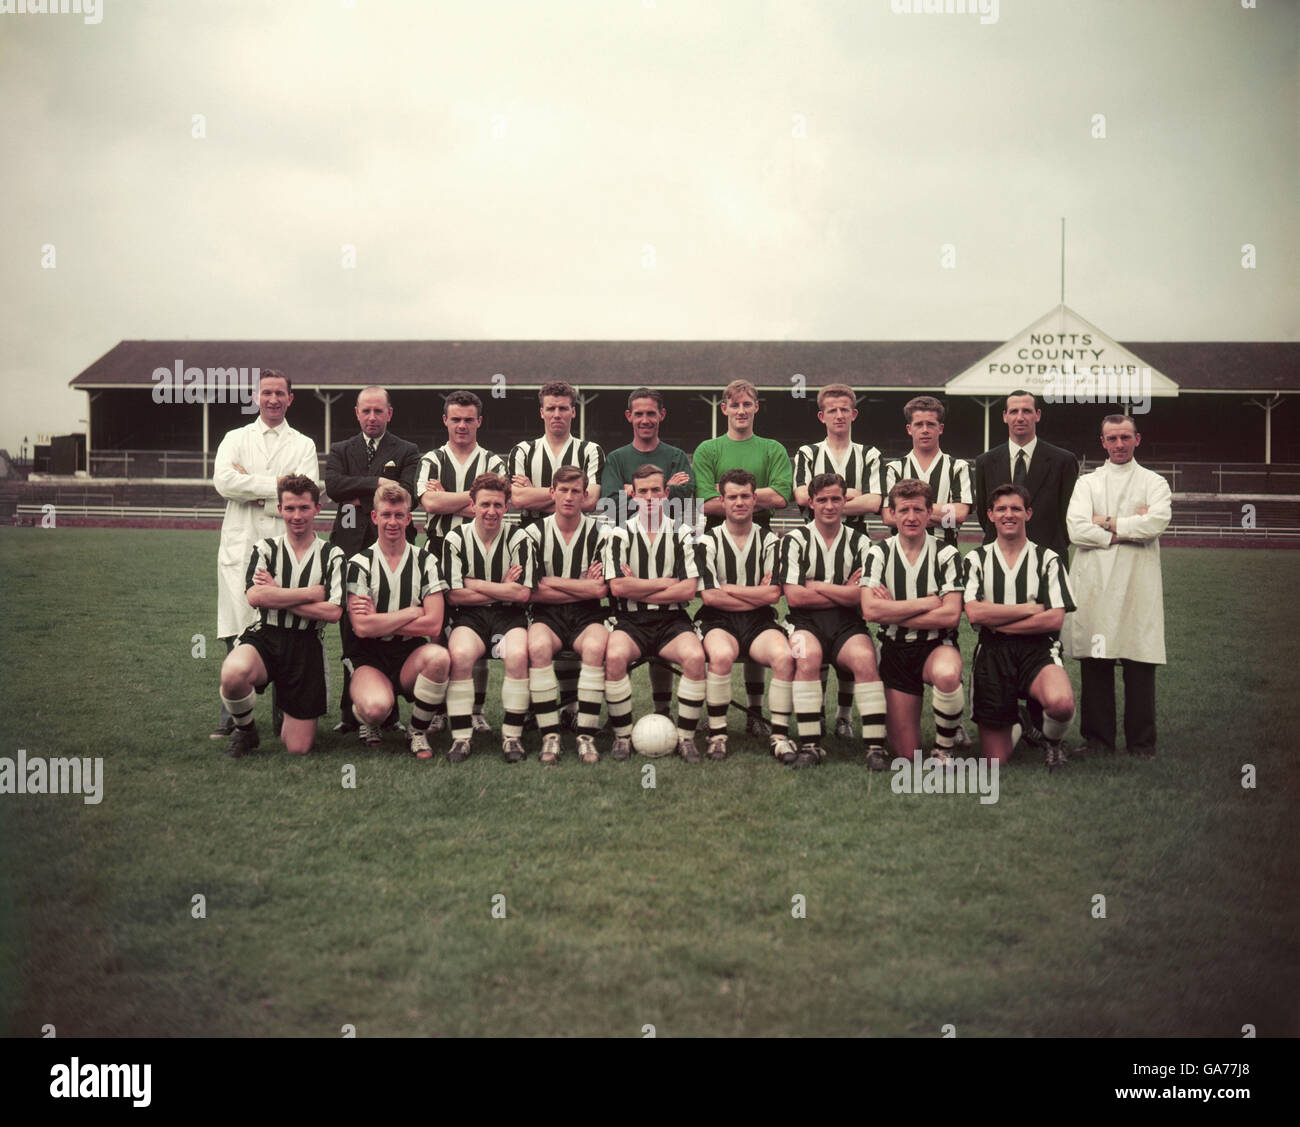 Soccer - Football League Division 3 - Notts County Photocall Stock Photo